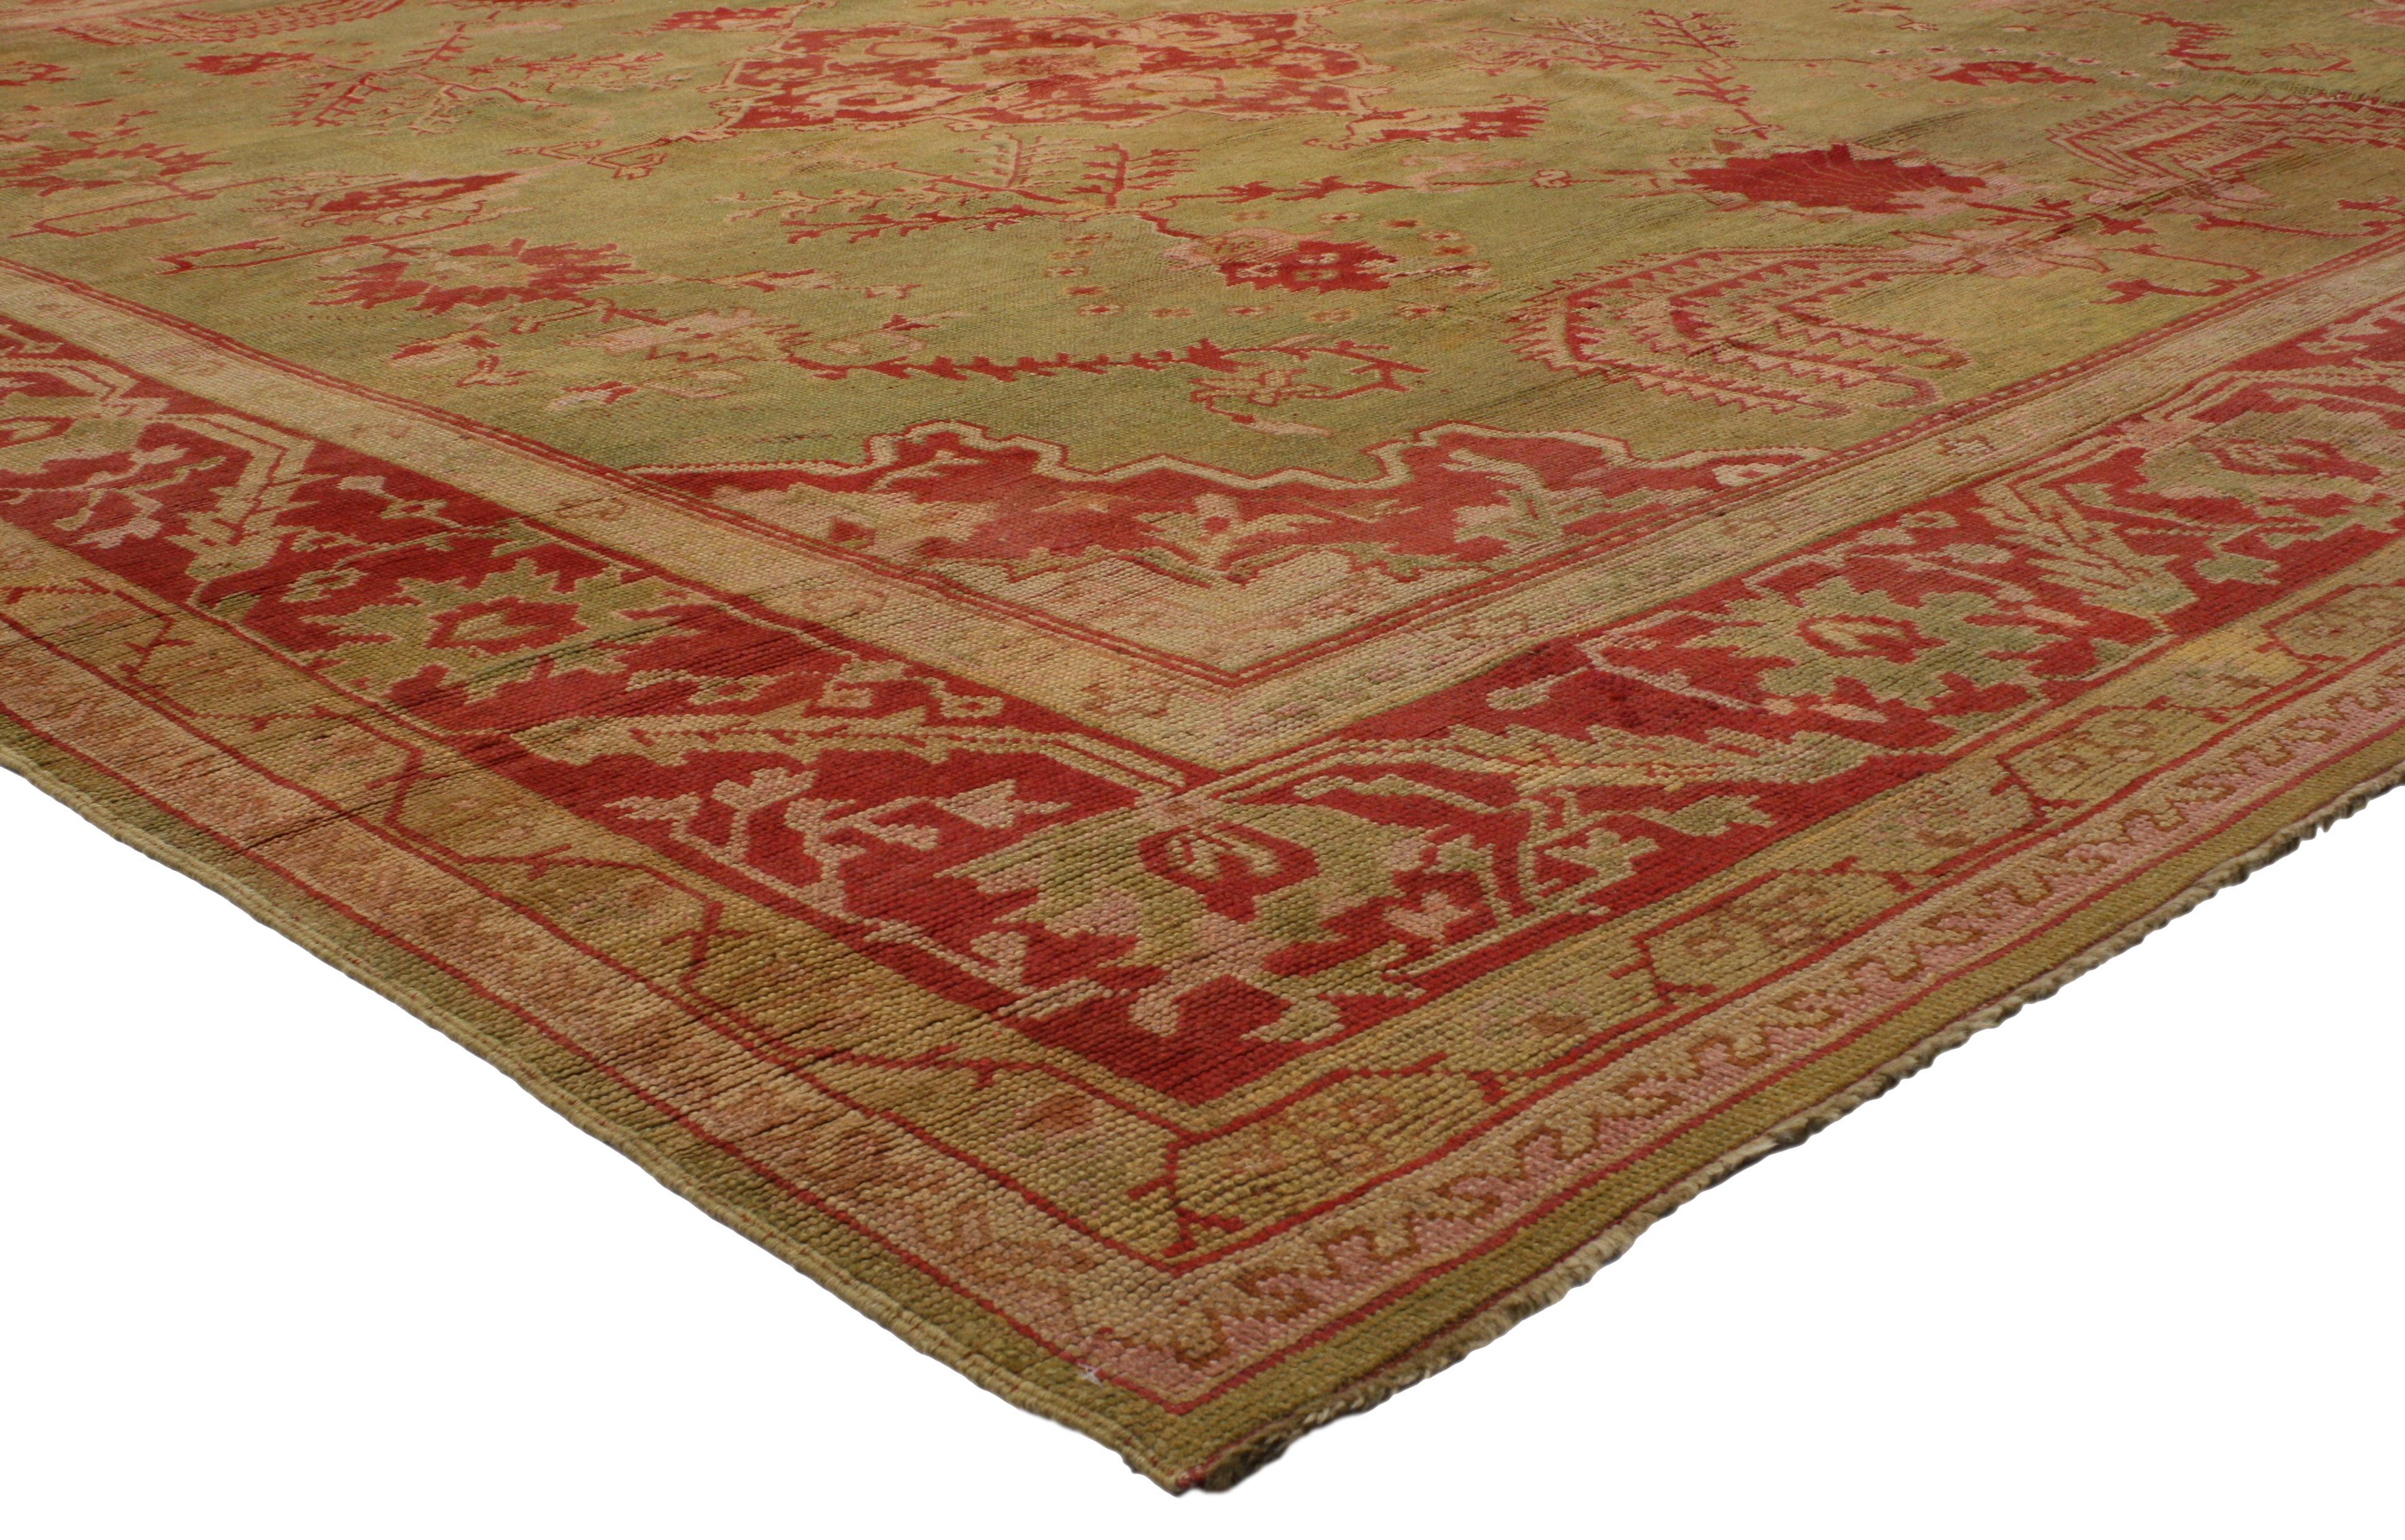 74173 Antique Turkish Oushak Area Rug with Weeping Willow Tree Design. This hand-knotted wool colorful antique Turkish Oushak rug features a red cusped lozenge medallion anchored with palmette finials on an abrashed and subdued pistachio and avocado